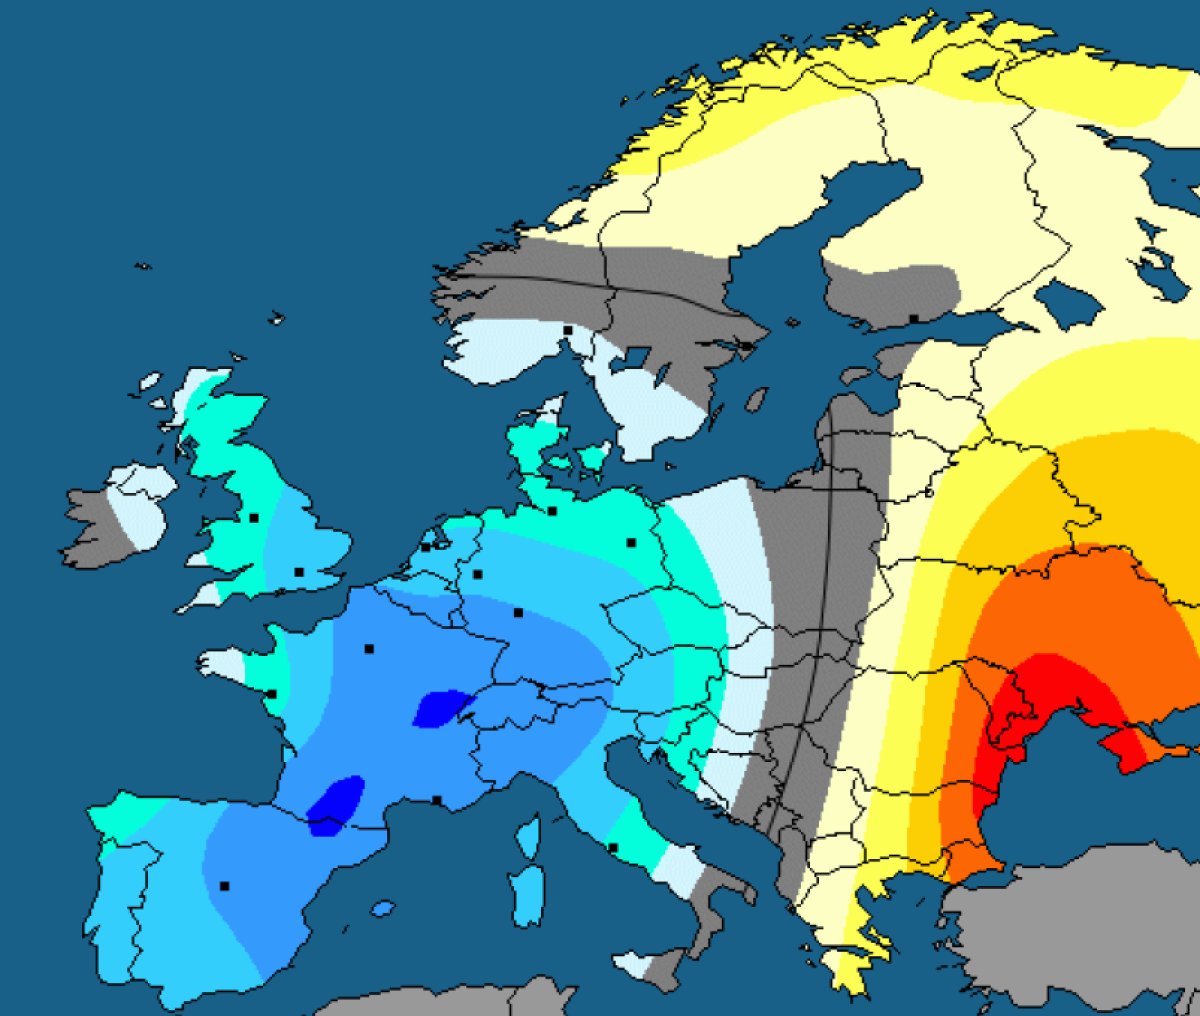 Cold wave in Europe: First challenge amid energy crisis #1